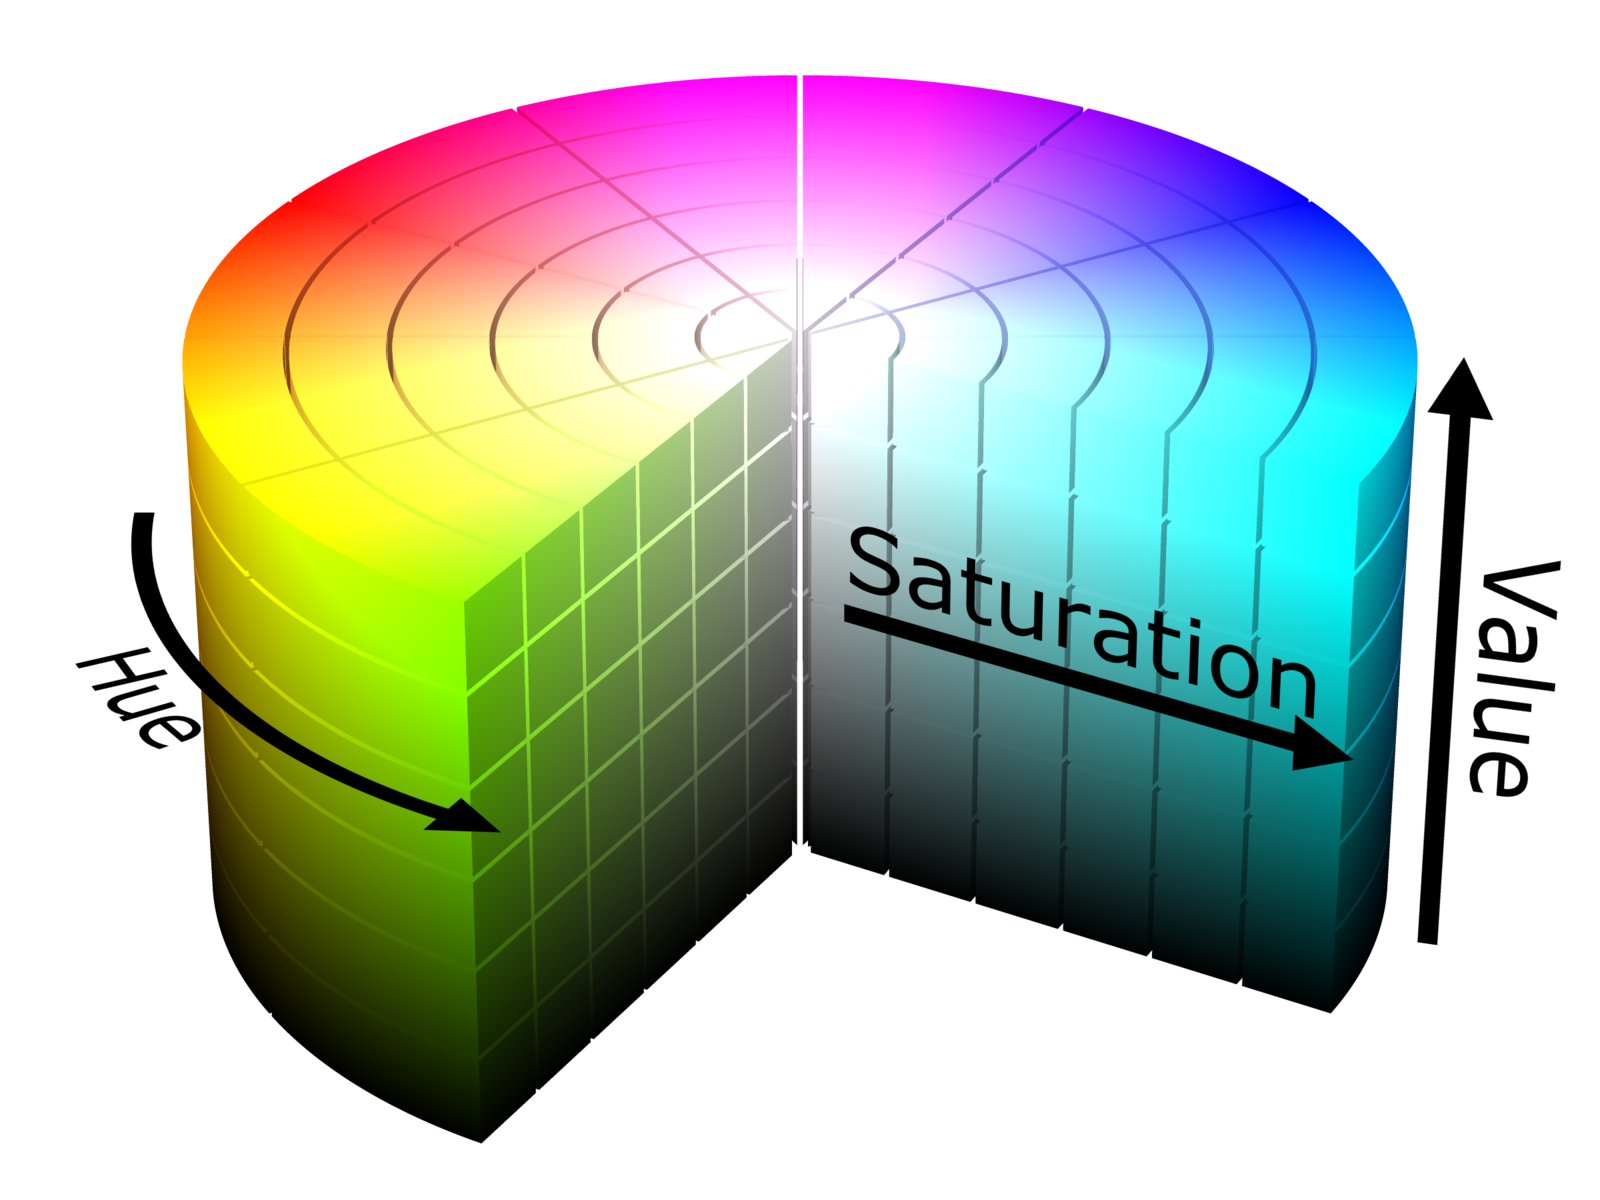 Diagram of a cylinder showing value (or brightness) vertically, chroma (or saturation) extending along the radius, and hue around the circumference.